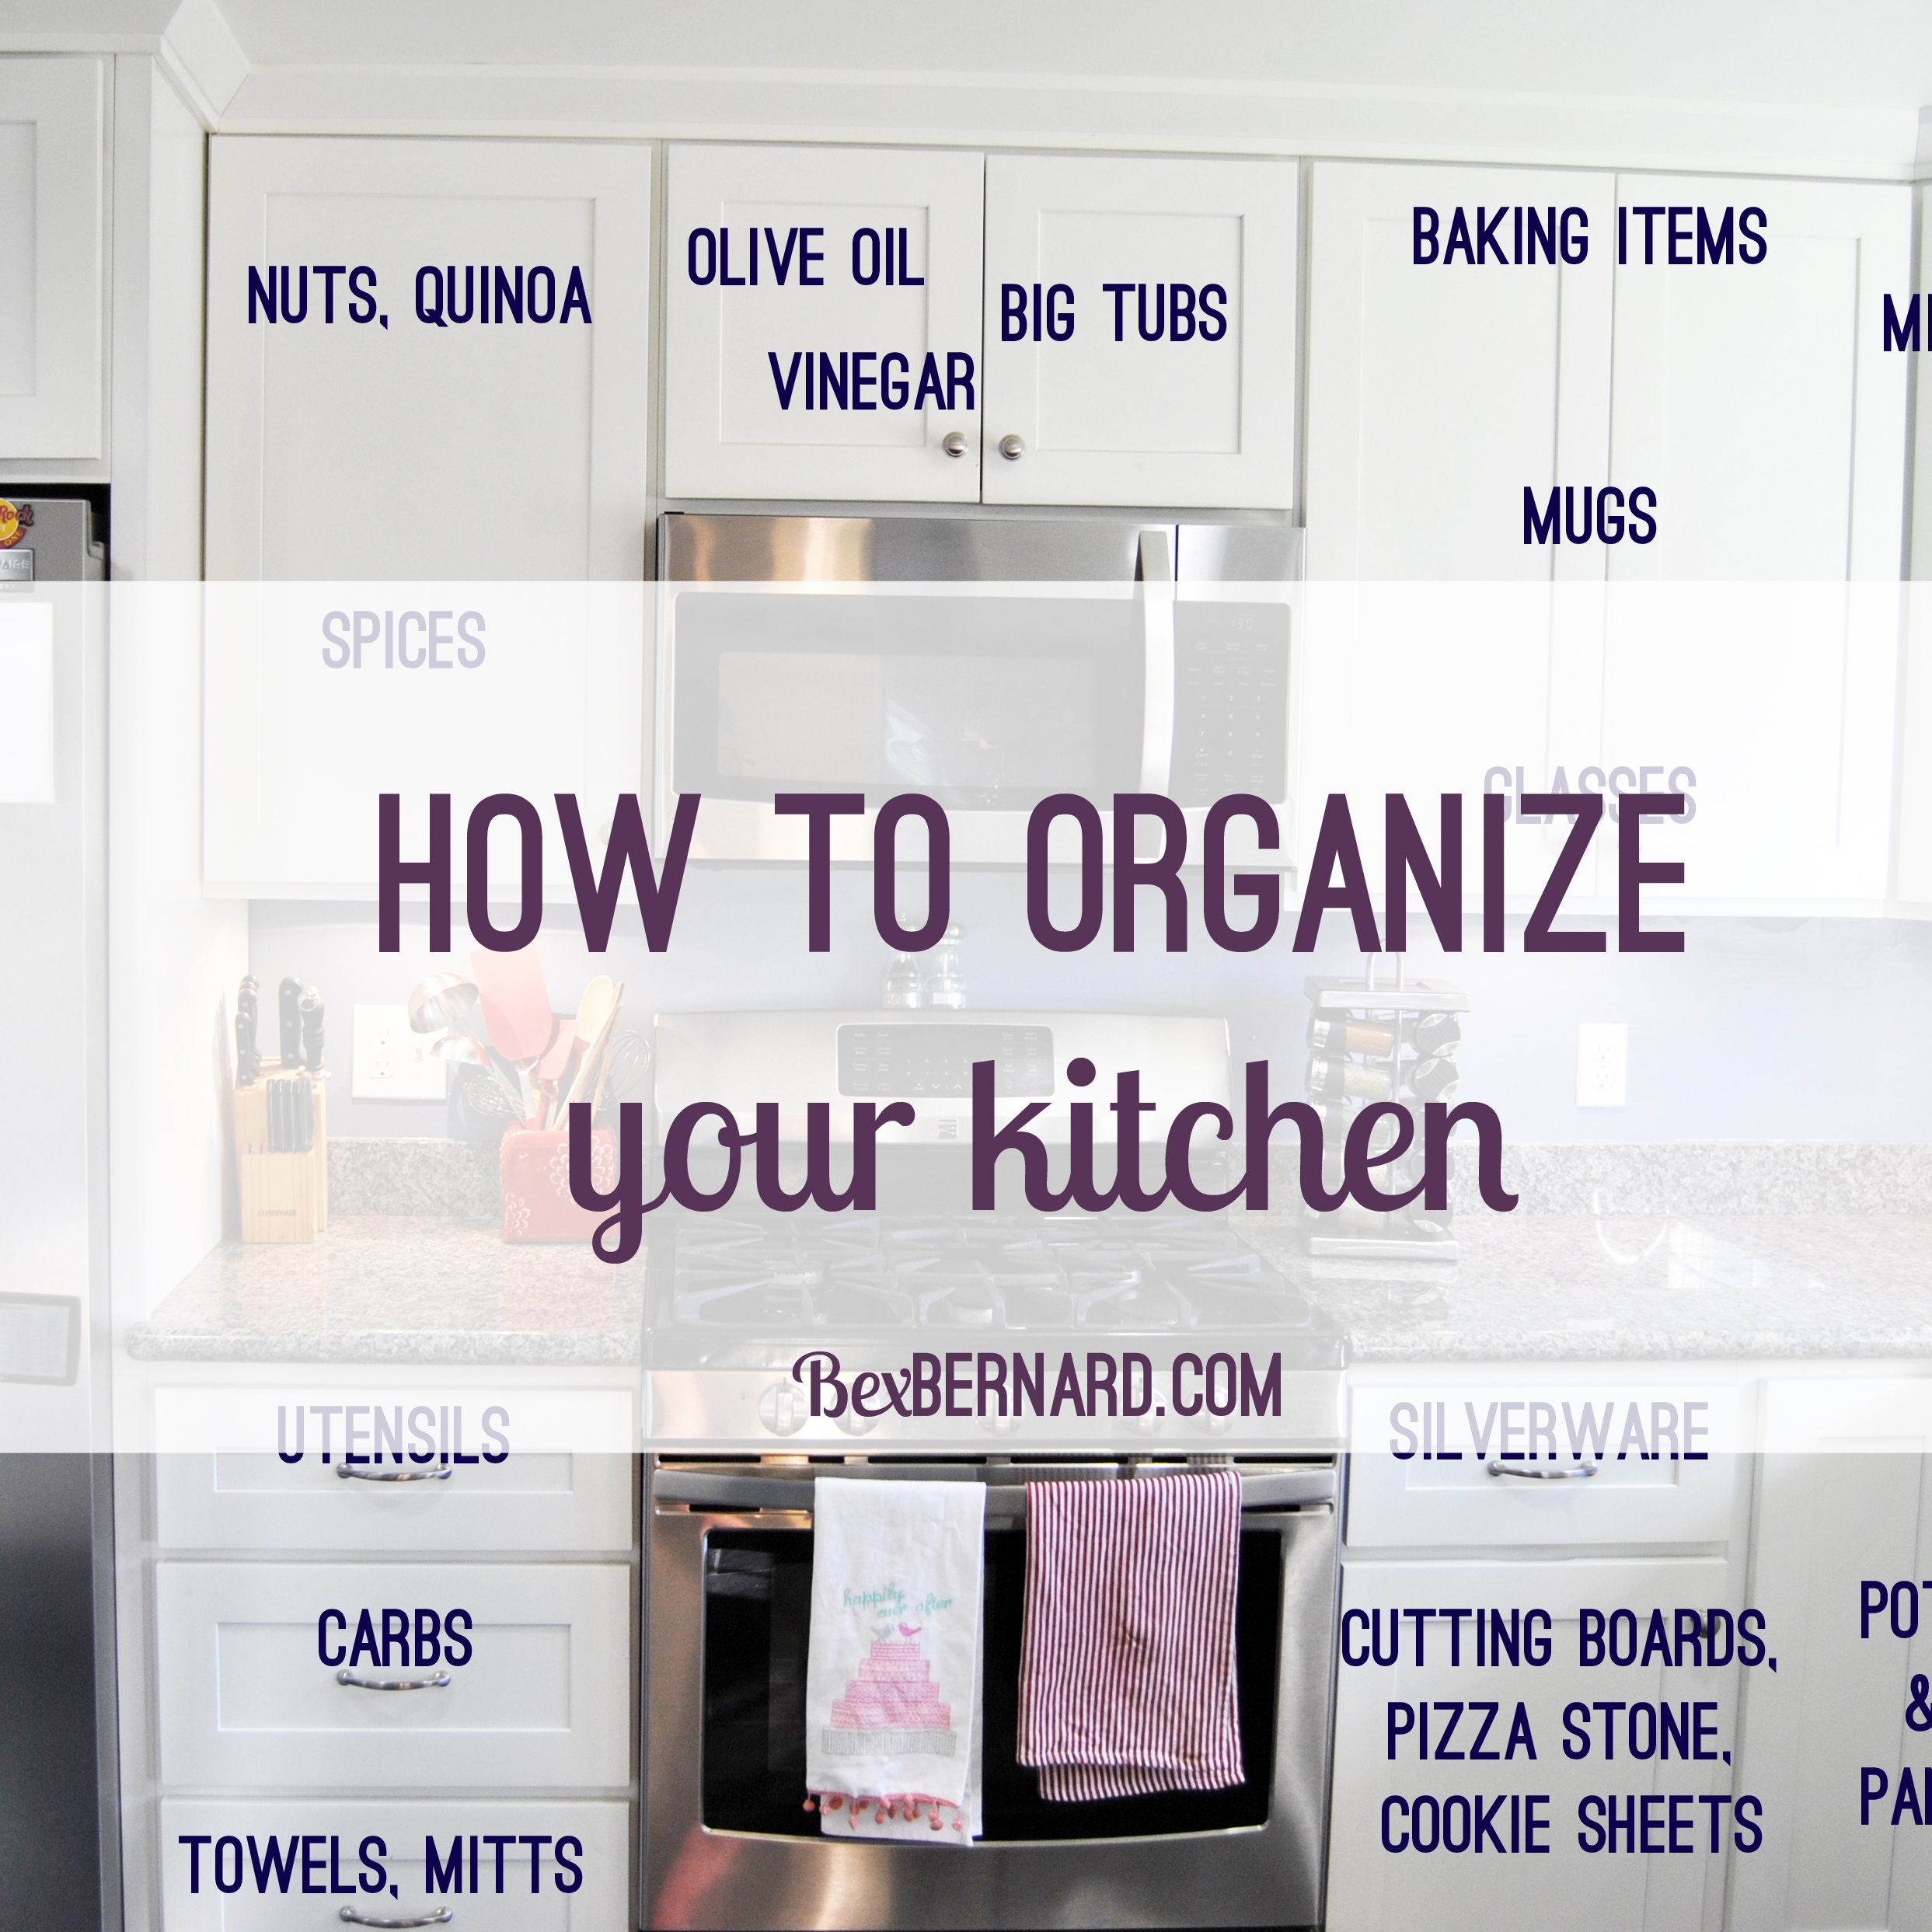 How To Organize Your Kitchen Home, How To Arrange Dishes In Kitchen Cabinets